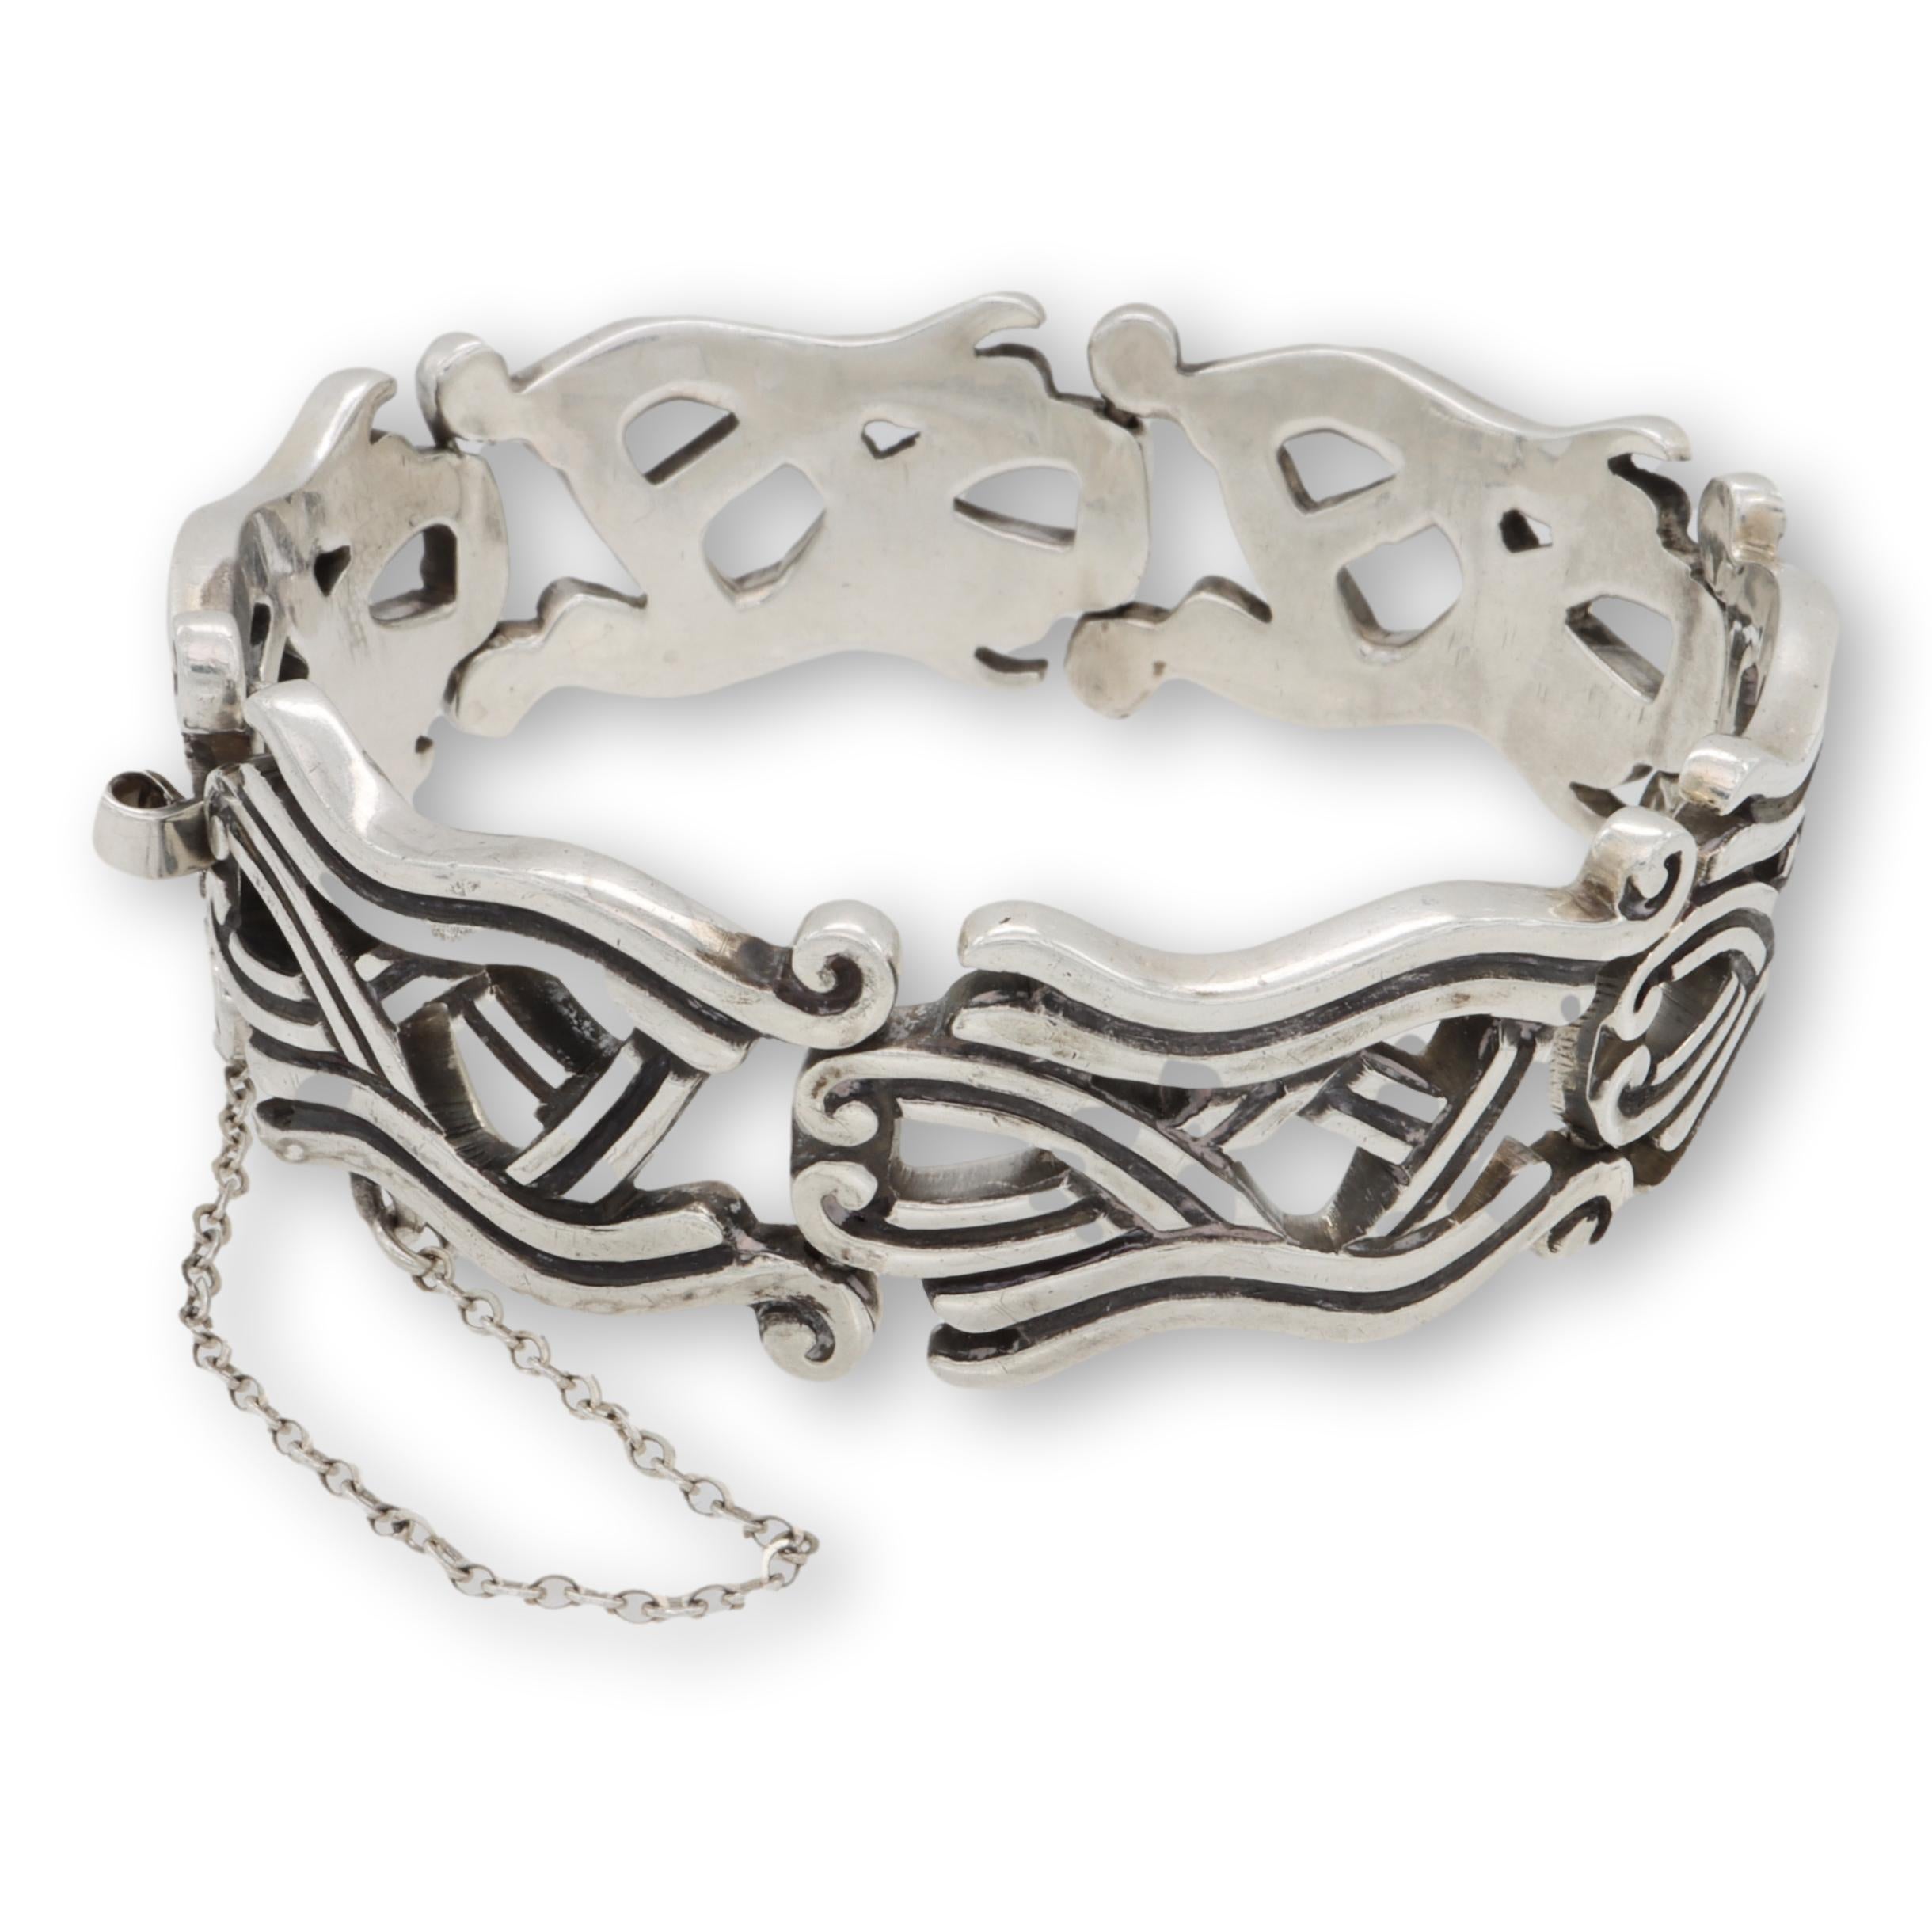 Vintage bracelet from TAXCO Mexico crafted in very fine sterling silver from the 1940's. This bracelet has Aztec open scroll work designs throughout with a blackened silver finish. This bracelet measures 8